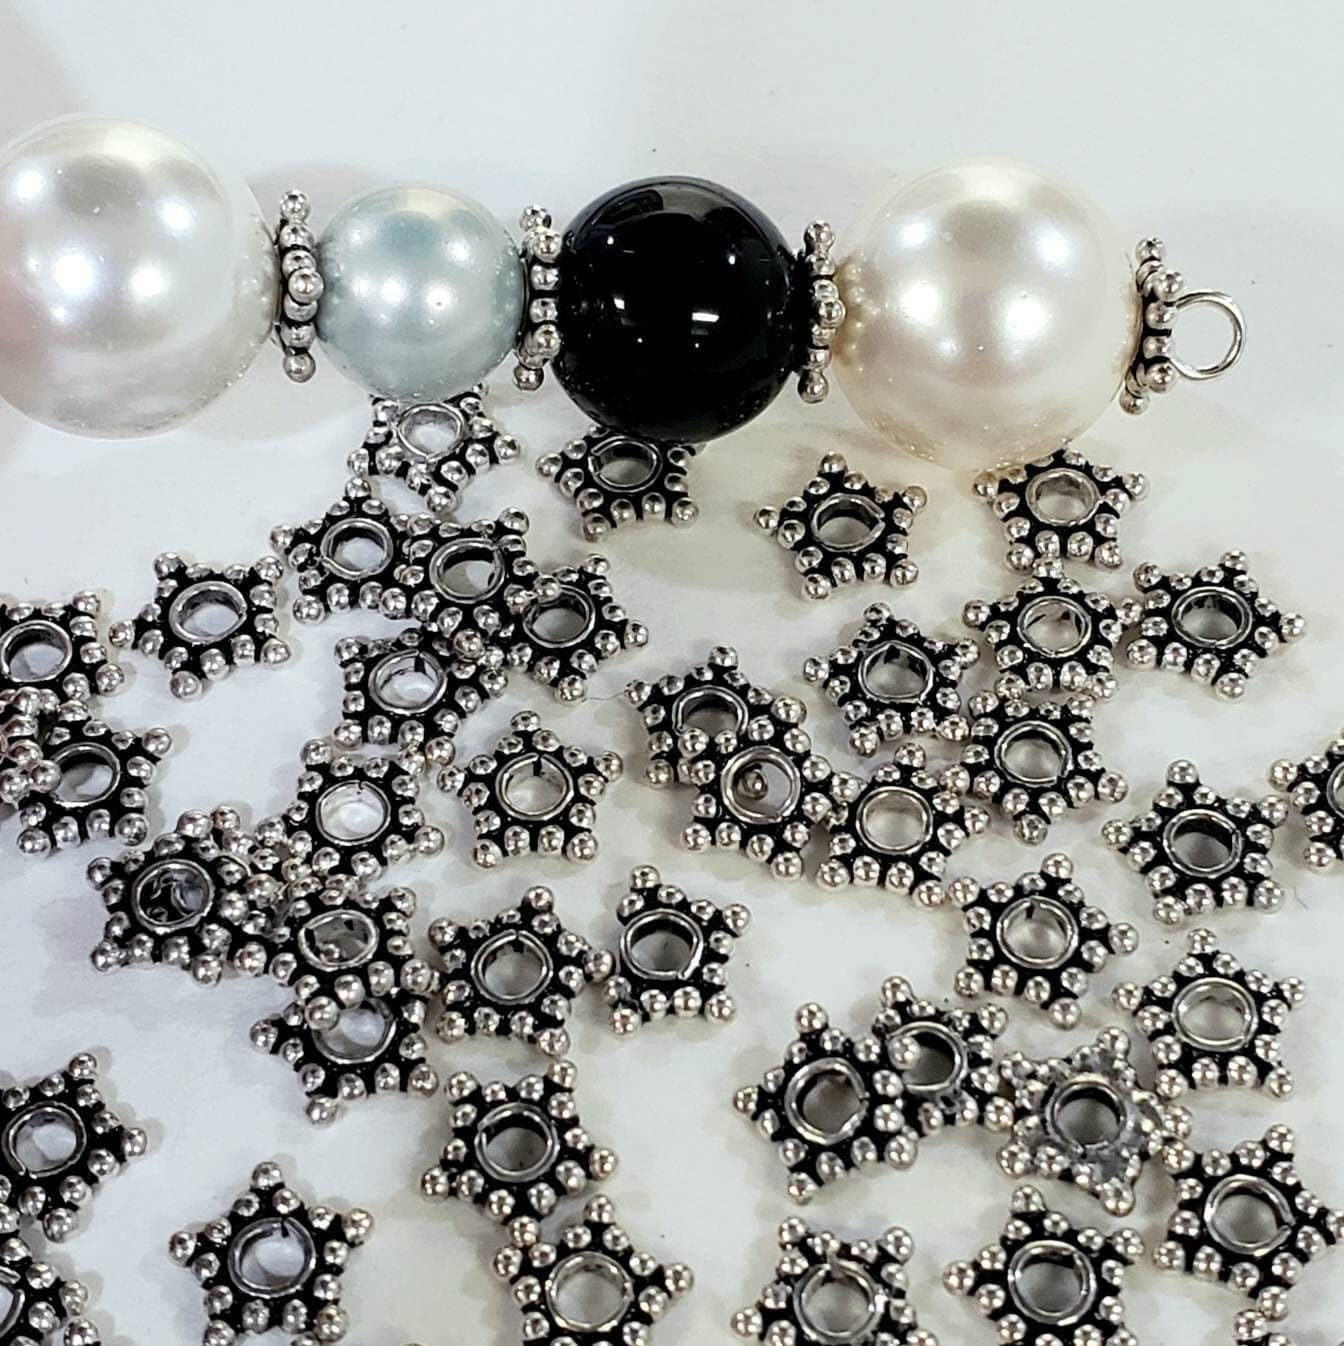 10 pcs 925 Sterling Silver Bali 6.5mm star spacer bead, vintage handmade jewelry making findings supplies, 1.8mm hole size